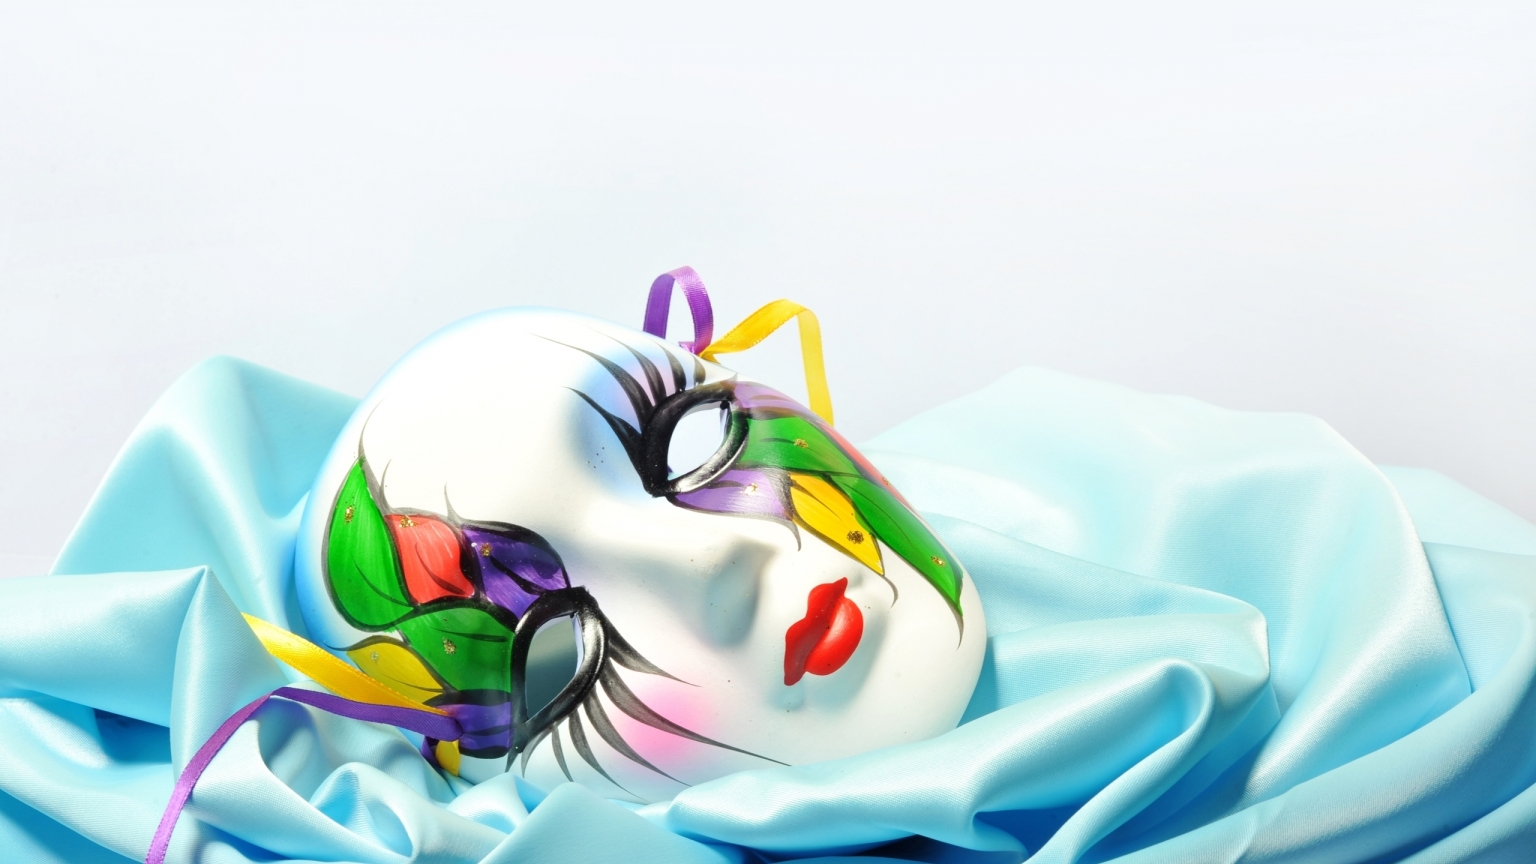 Lady Mask for 1536 x 864 HDTV resolution